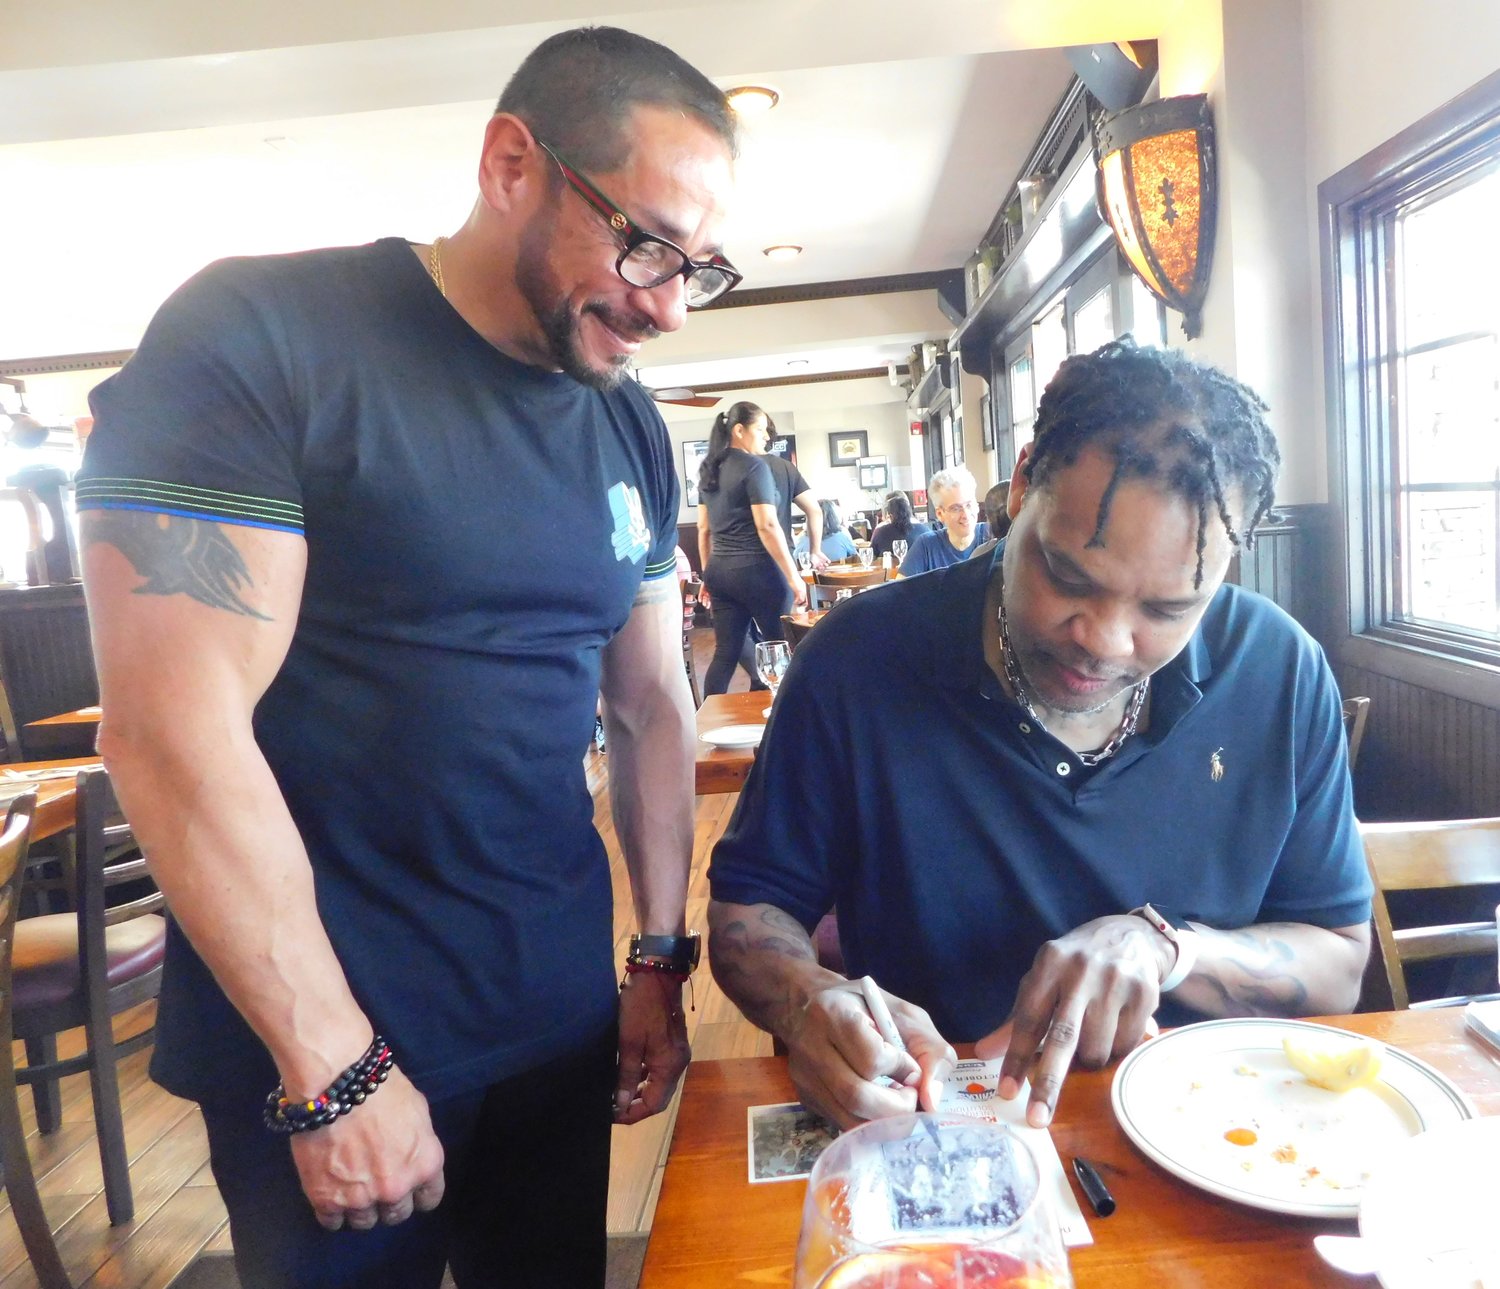 Former NBA star Latrell Sprewell, right, signed autographs for fans at the River House Grille at the 32nd Annual Nautical Mile Festival on June 4.